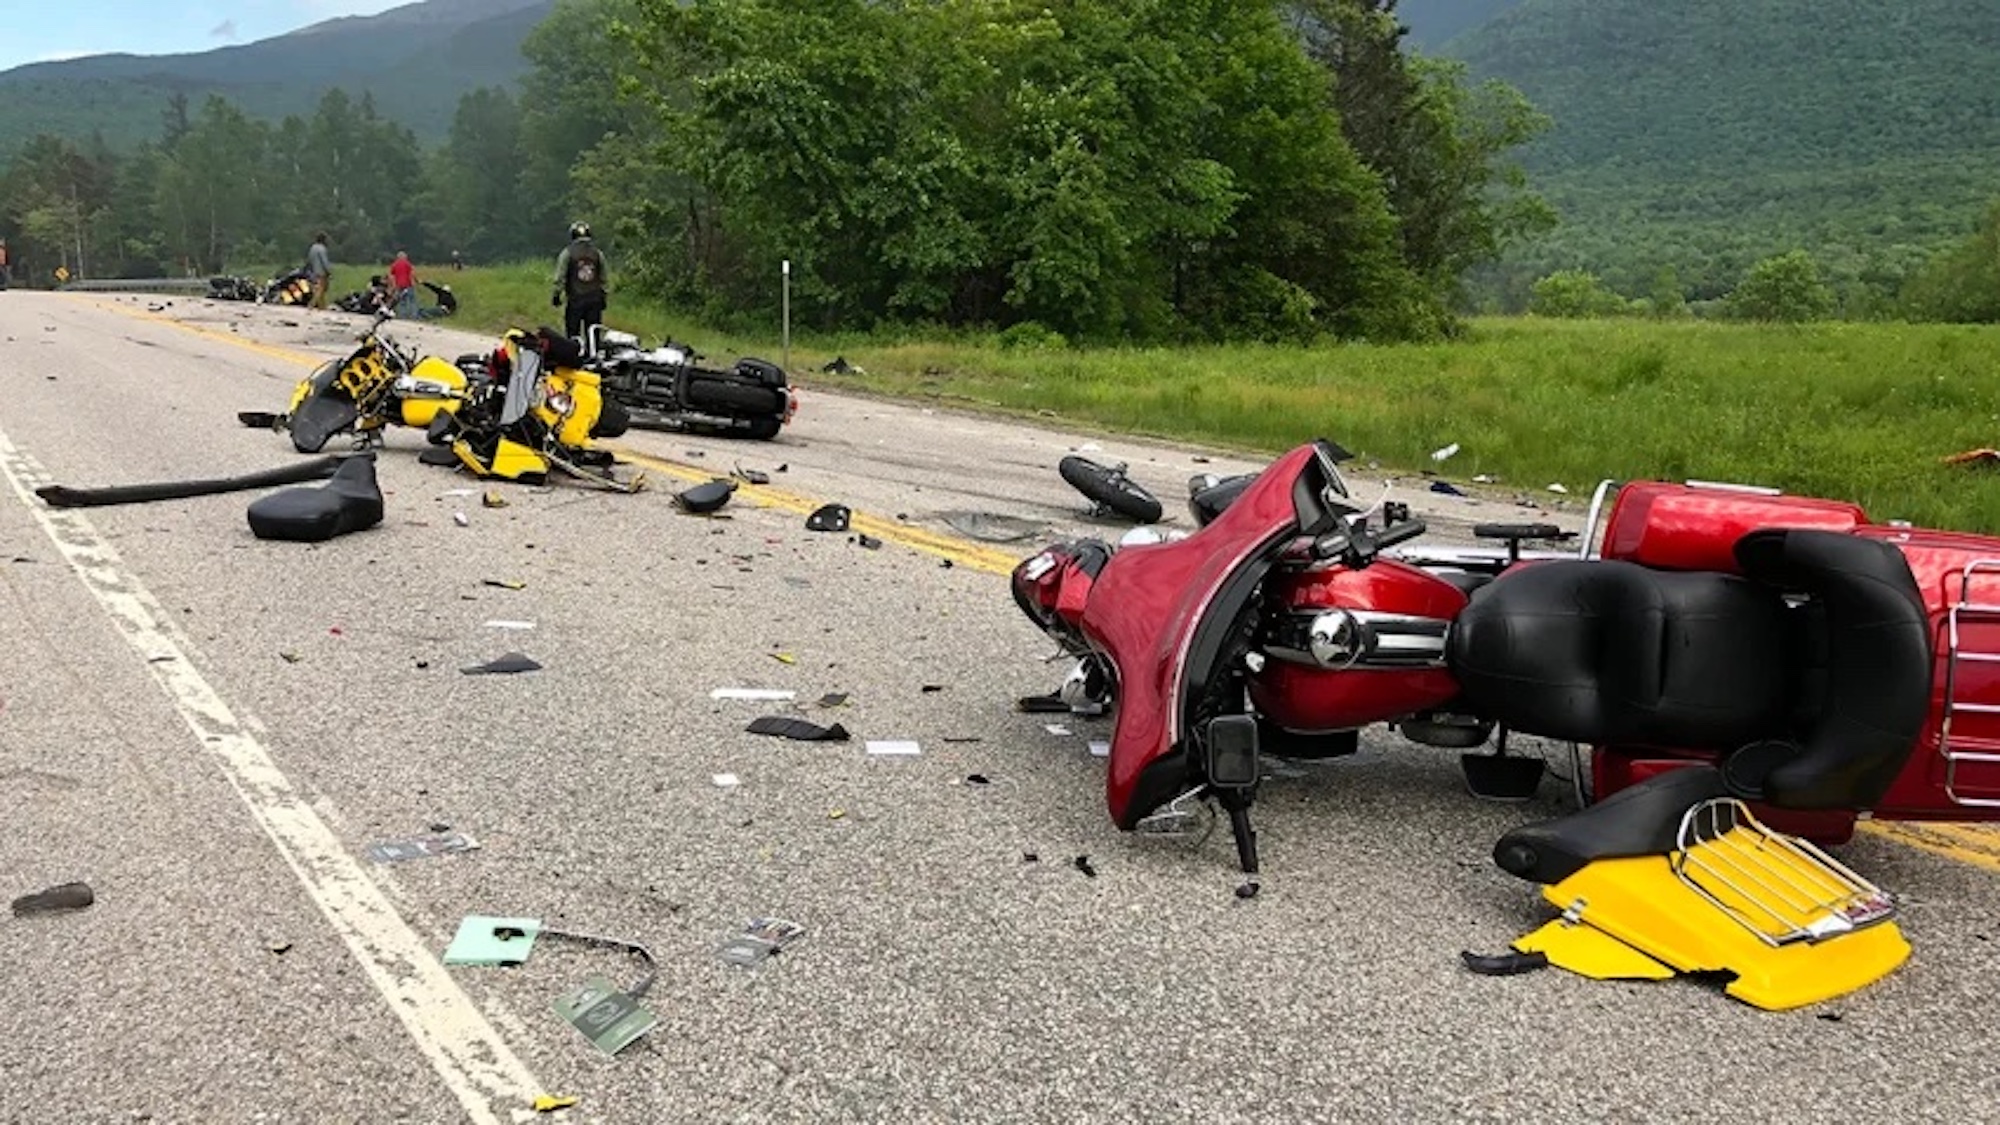 A view of a crashed motorcycle and truck accident.